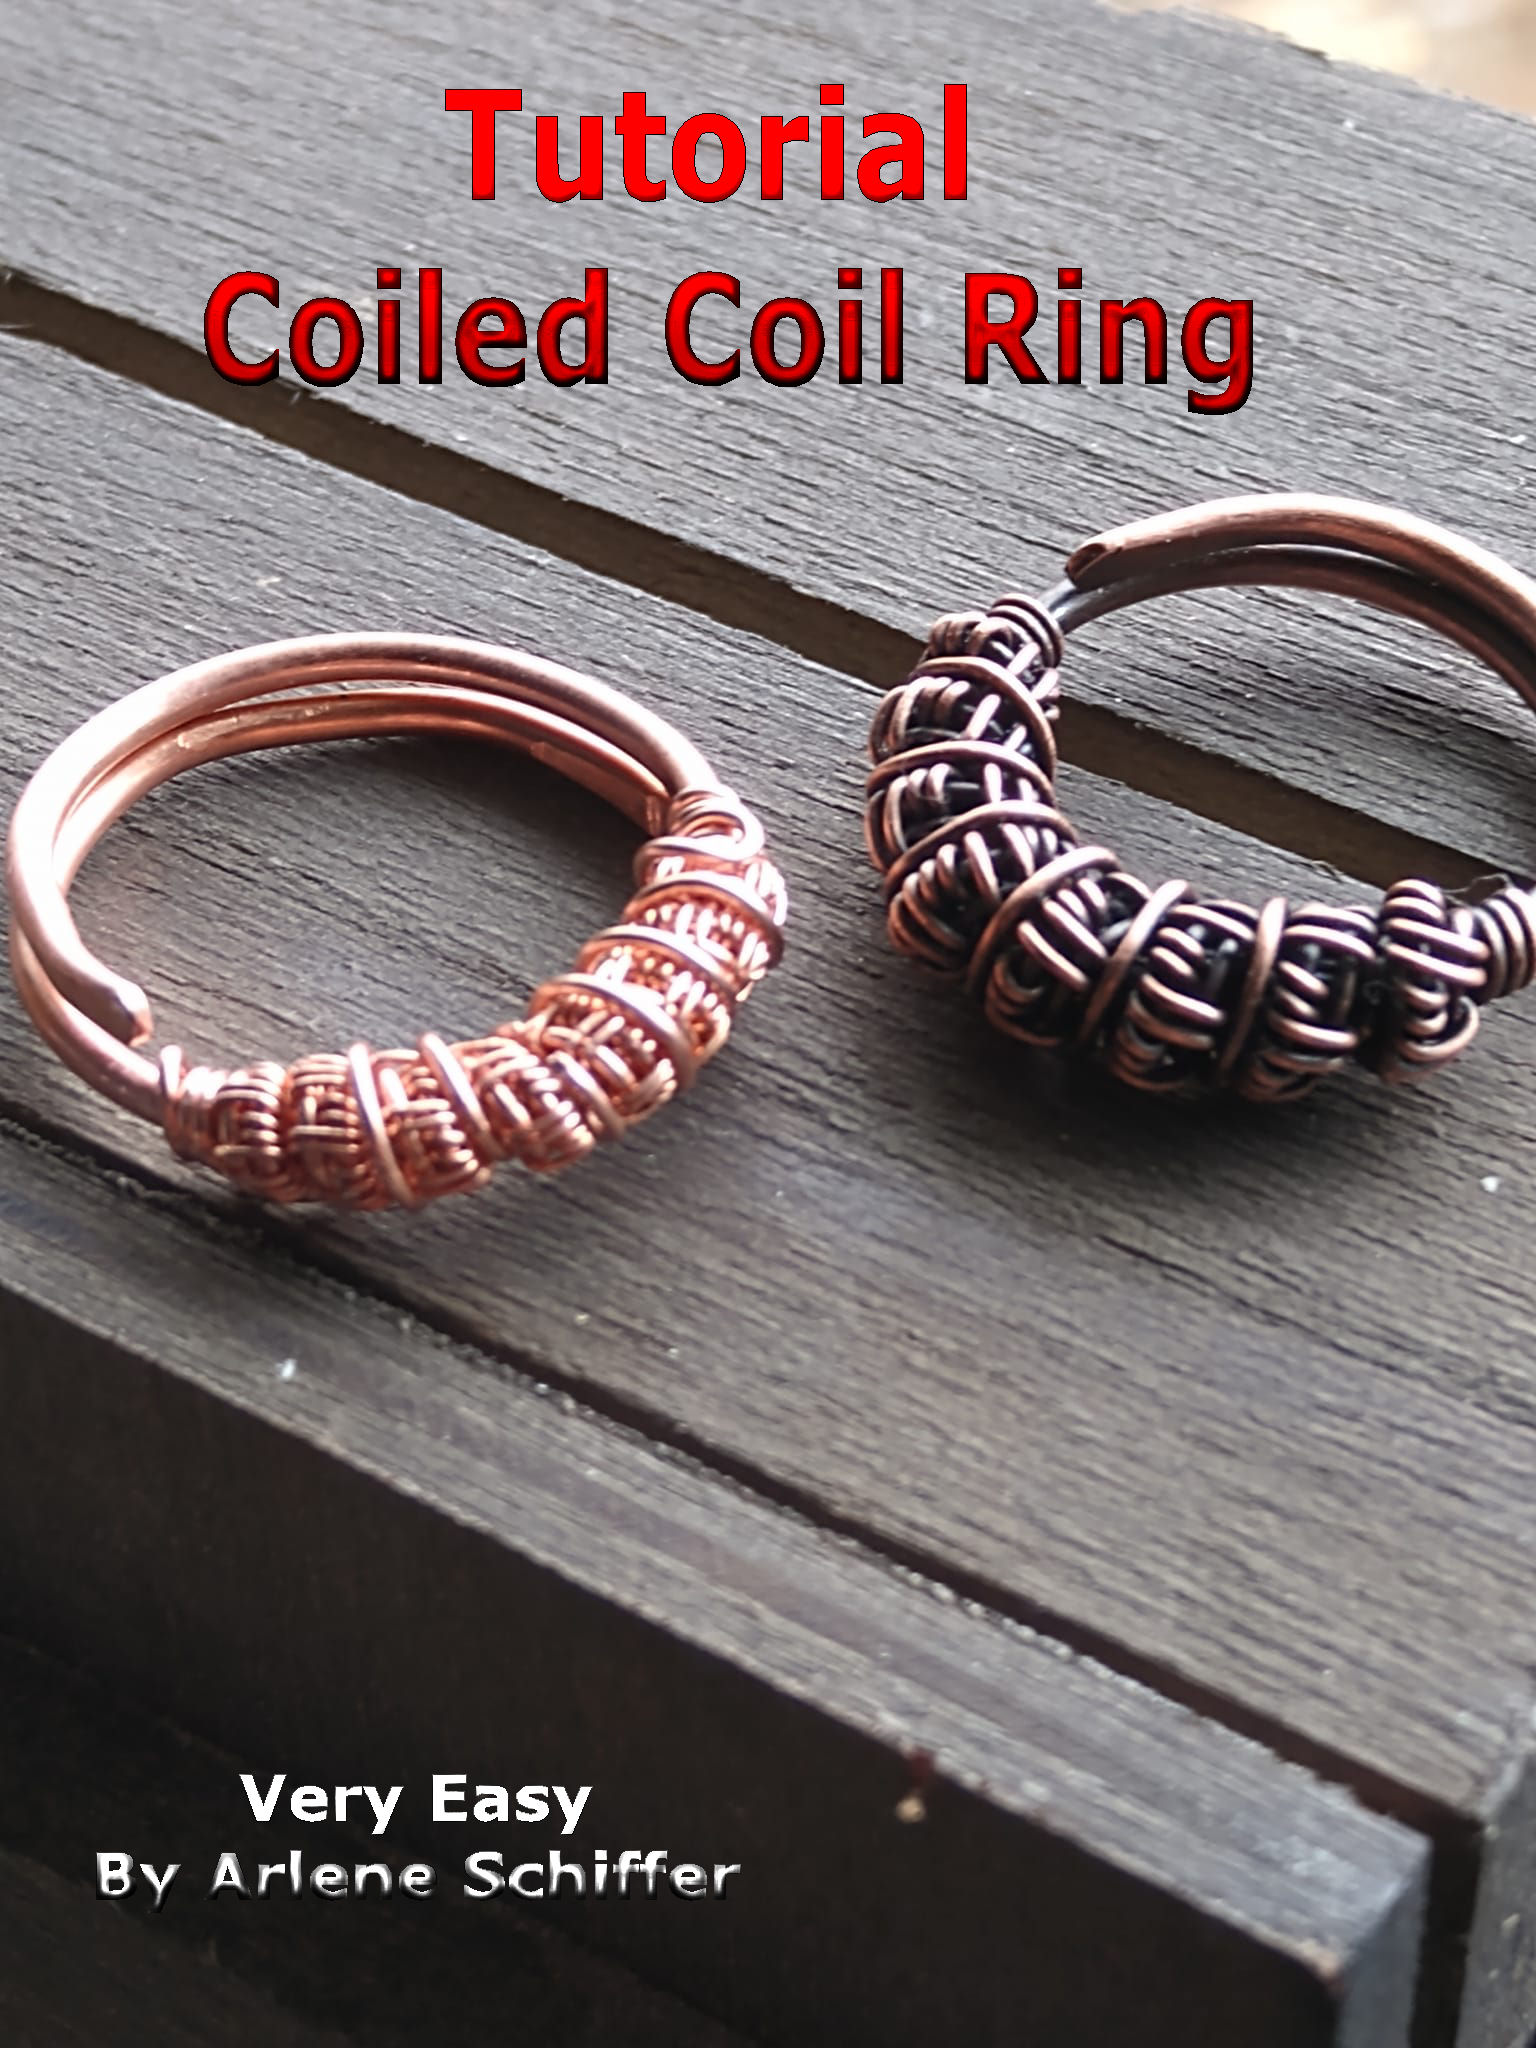 Coiled Coil Ring